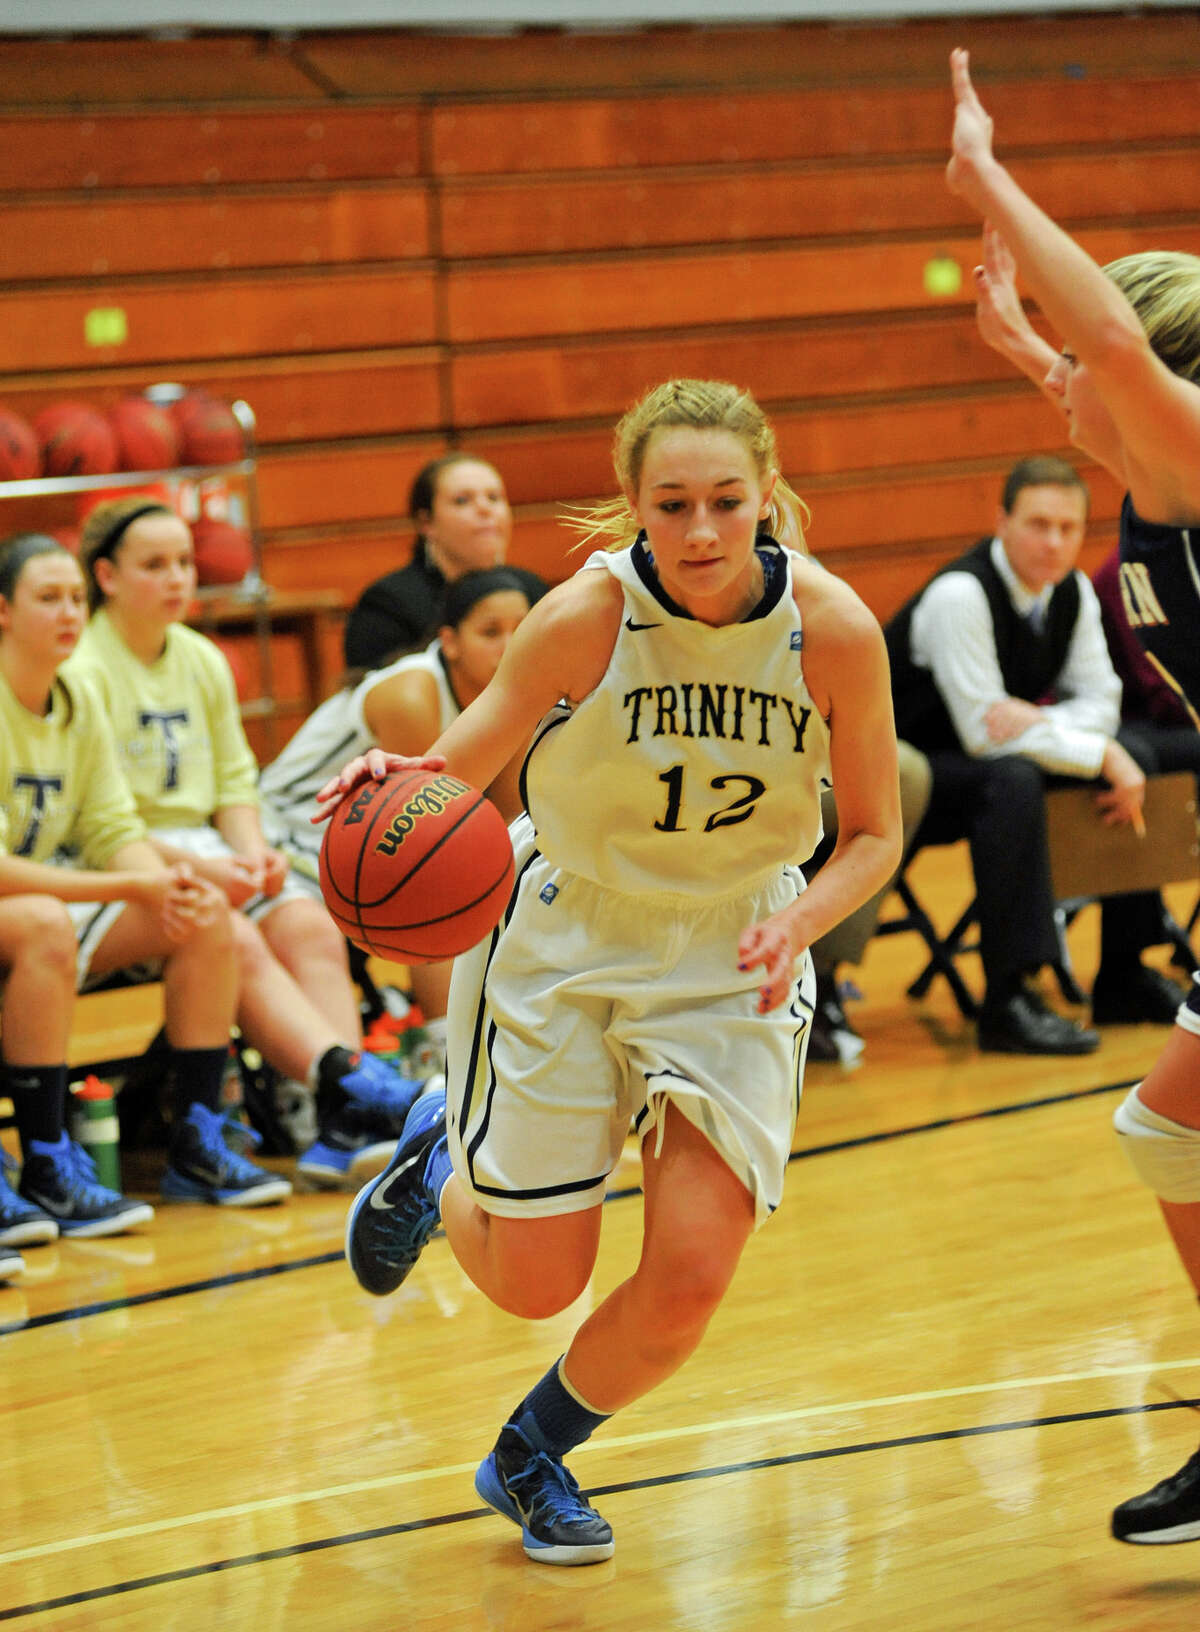 Mackenzie Griffin, a Stamford native, recently scored her 1,000th career point at Trinity College.